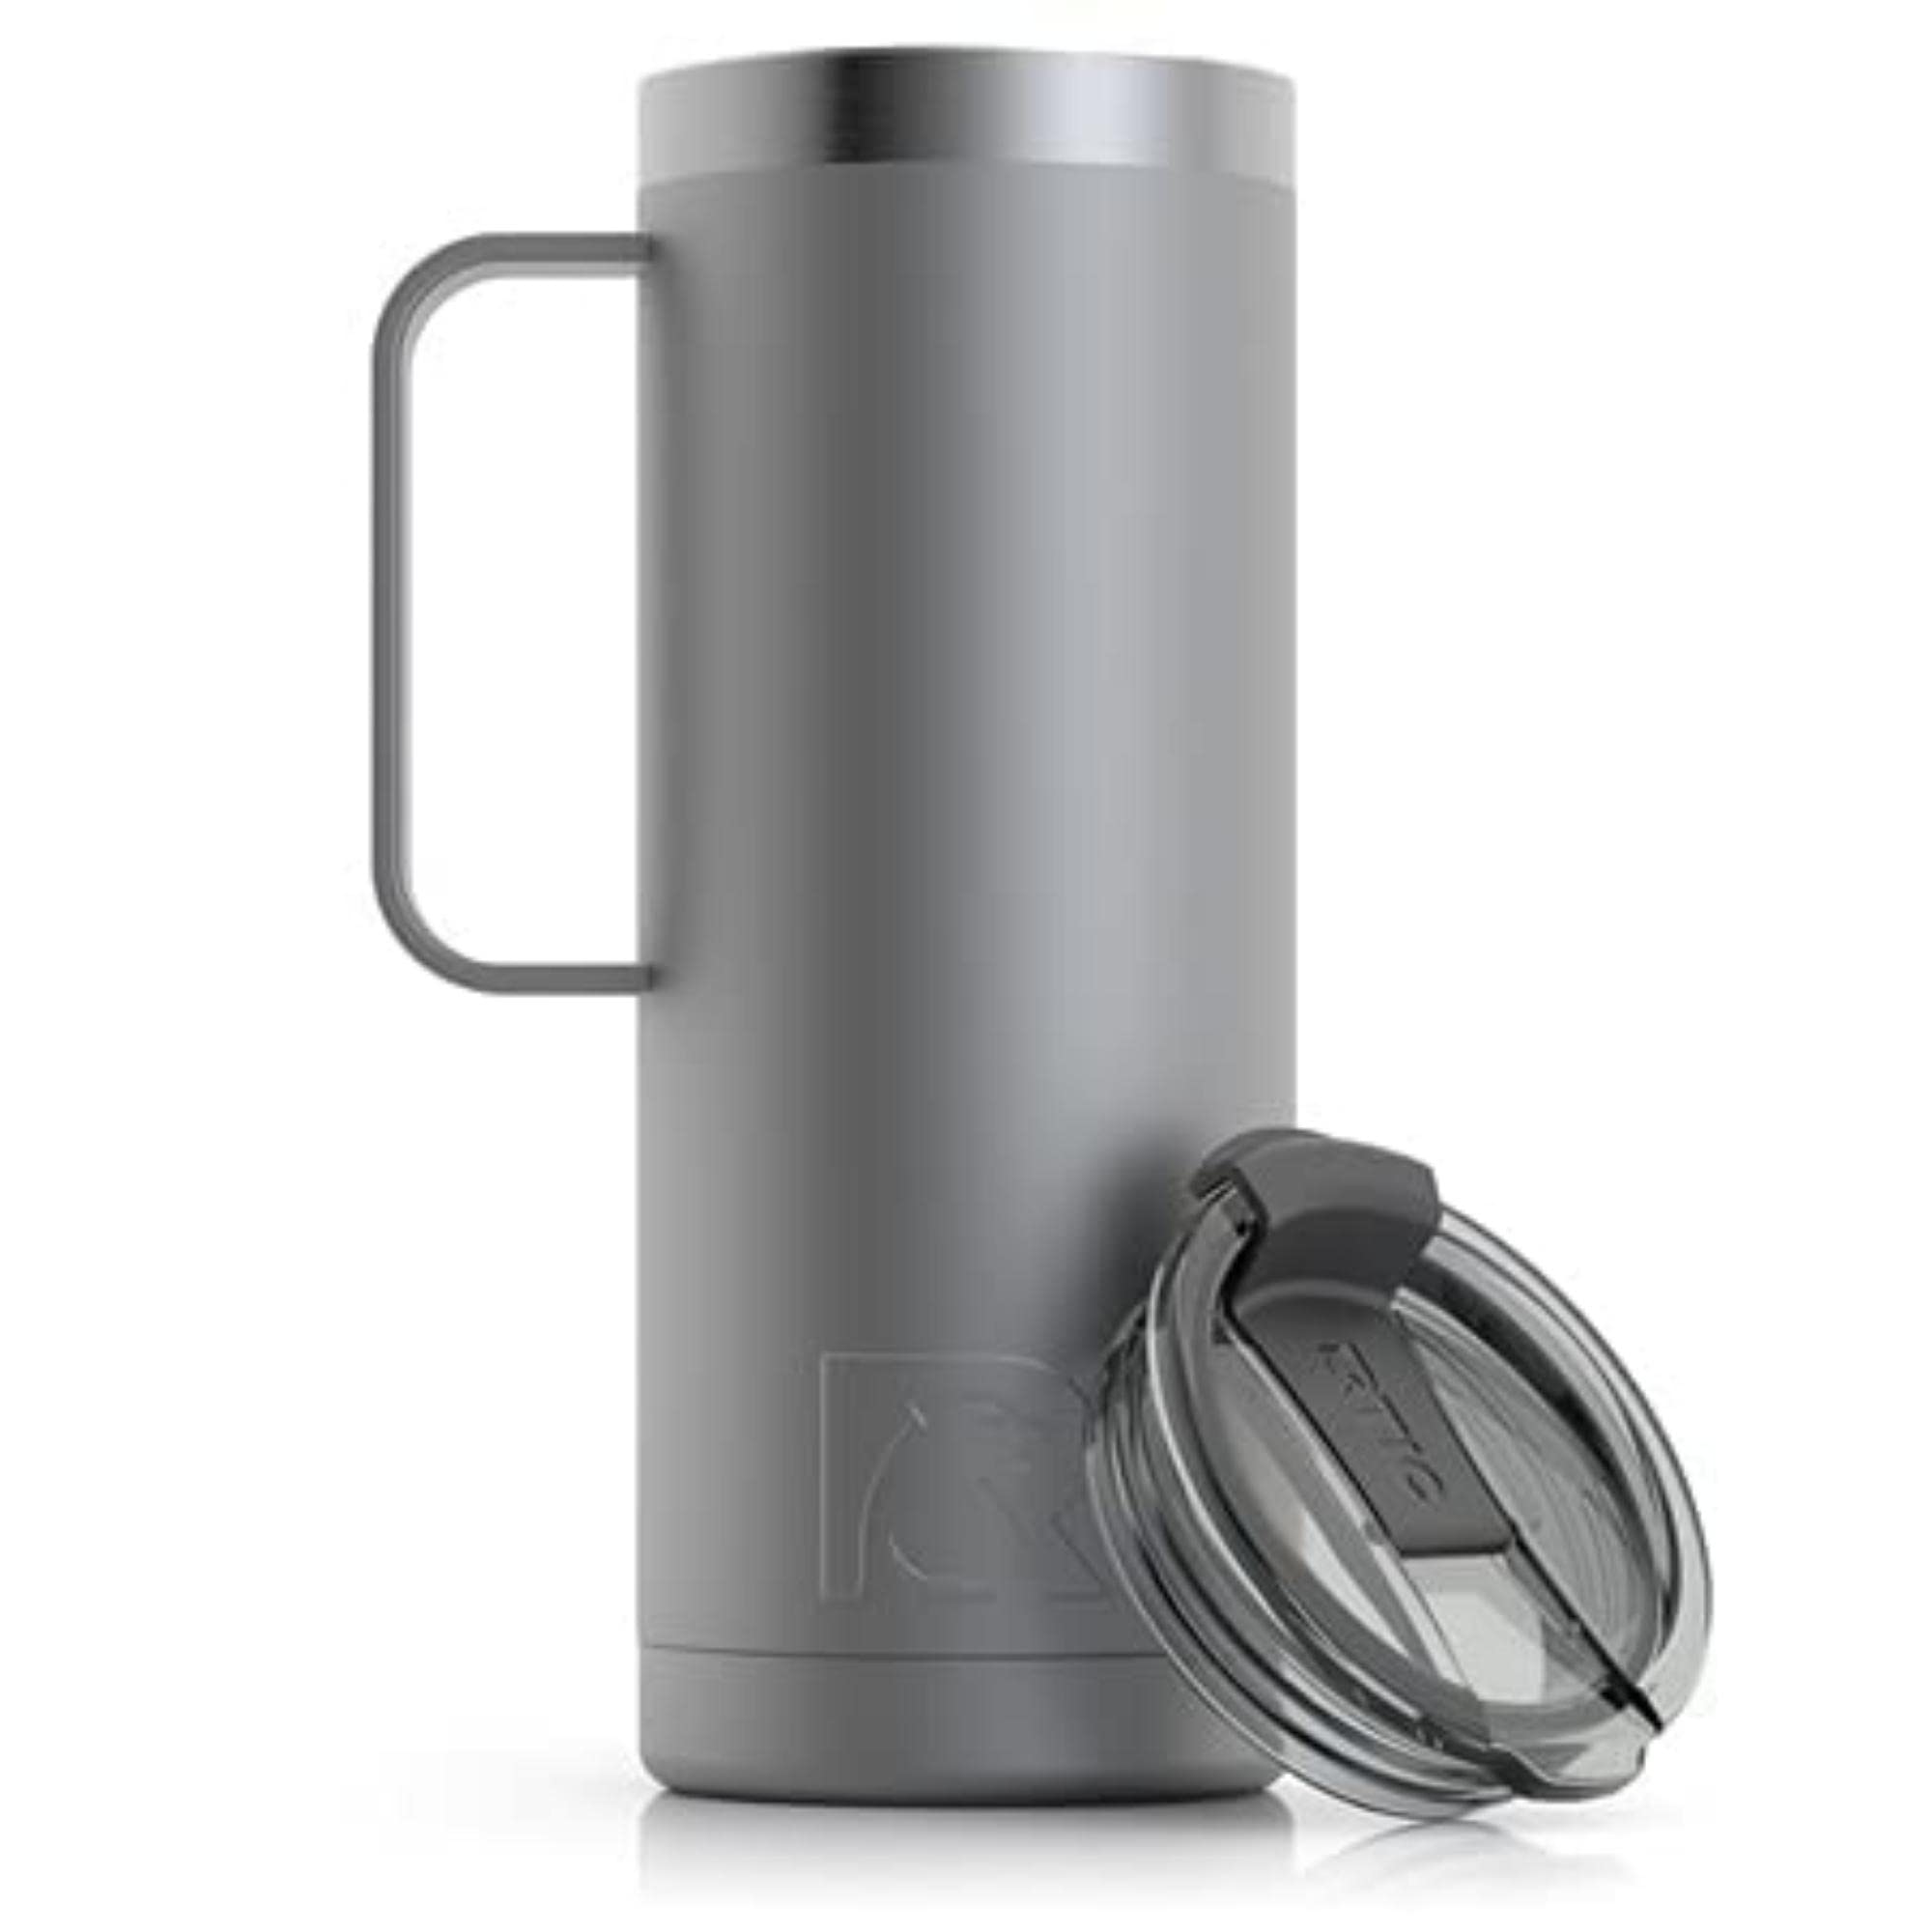 and　Tumbler　Thermal　for　Steel　with　Stainless　Cold,　and　Leak,　Travel　Beverage　oz　Vacuum-Insulated　RTIC　Hot　Cup　Spill　Mugs,　20　Handle,　Camping,　Mug　Coffee　Lid　Car,　Proof,　Portable　Graphite